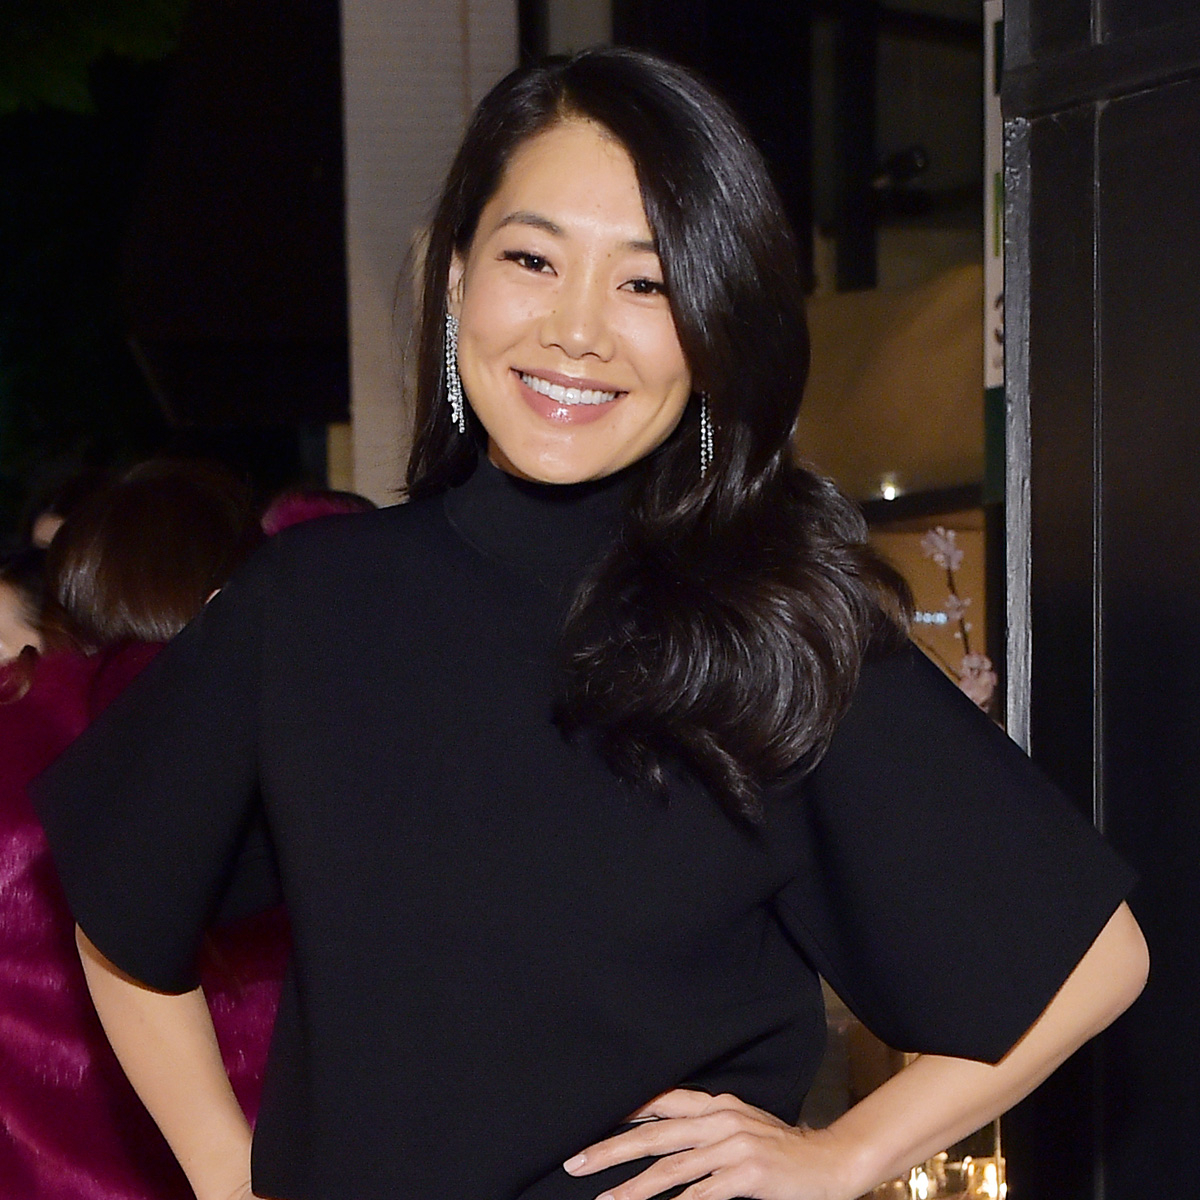 RHOBH's Crystal Kung Minkoff Says Asians Can't "Ignore" Attacks - E